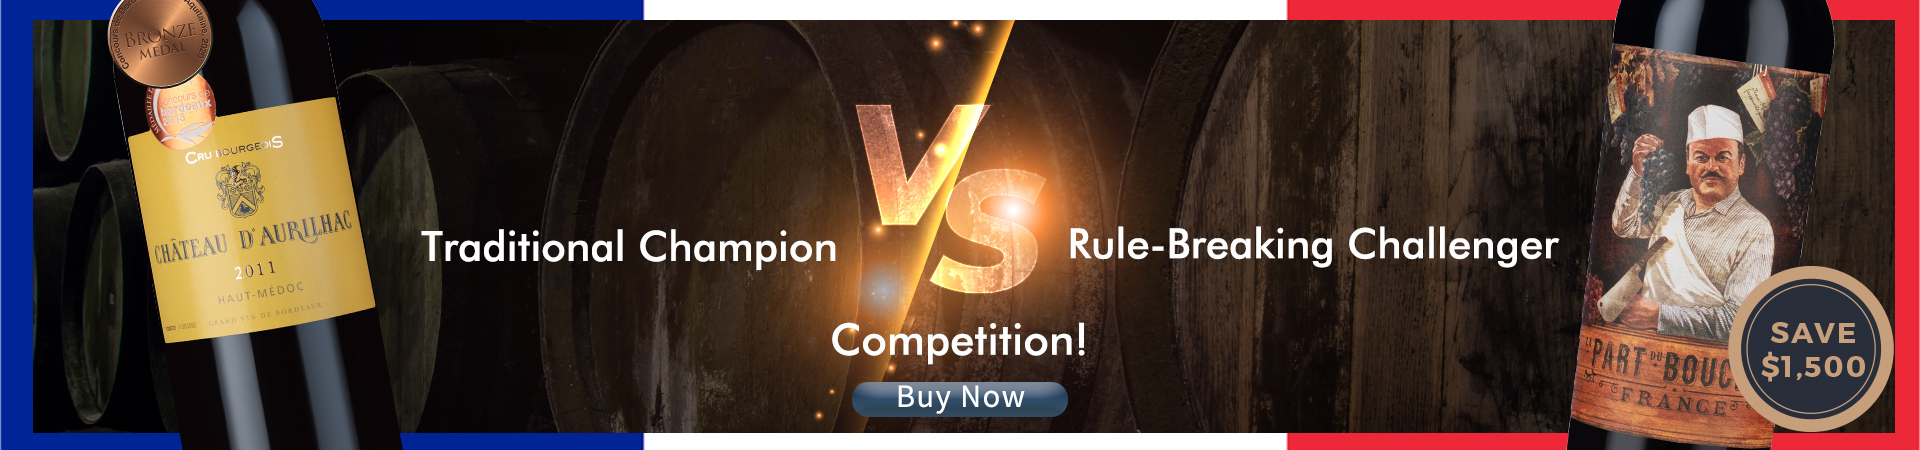 Traditional Champion vs Rule-Breaking Challenger